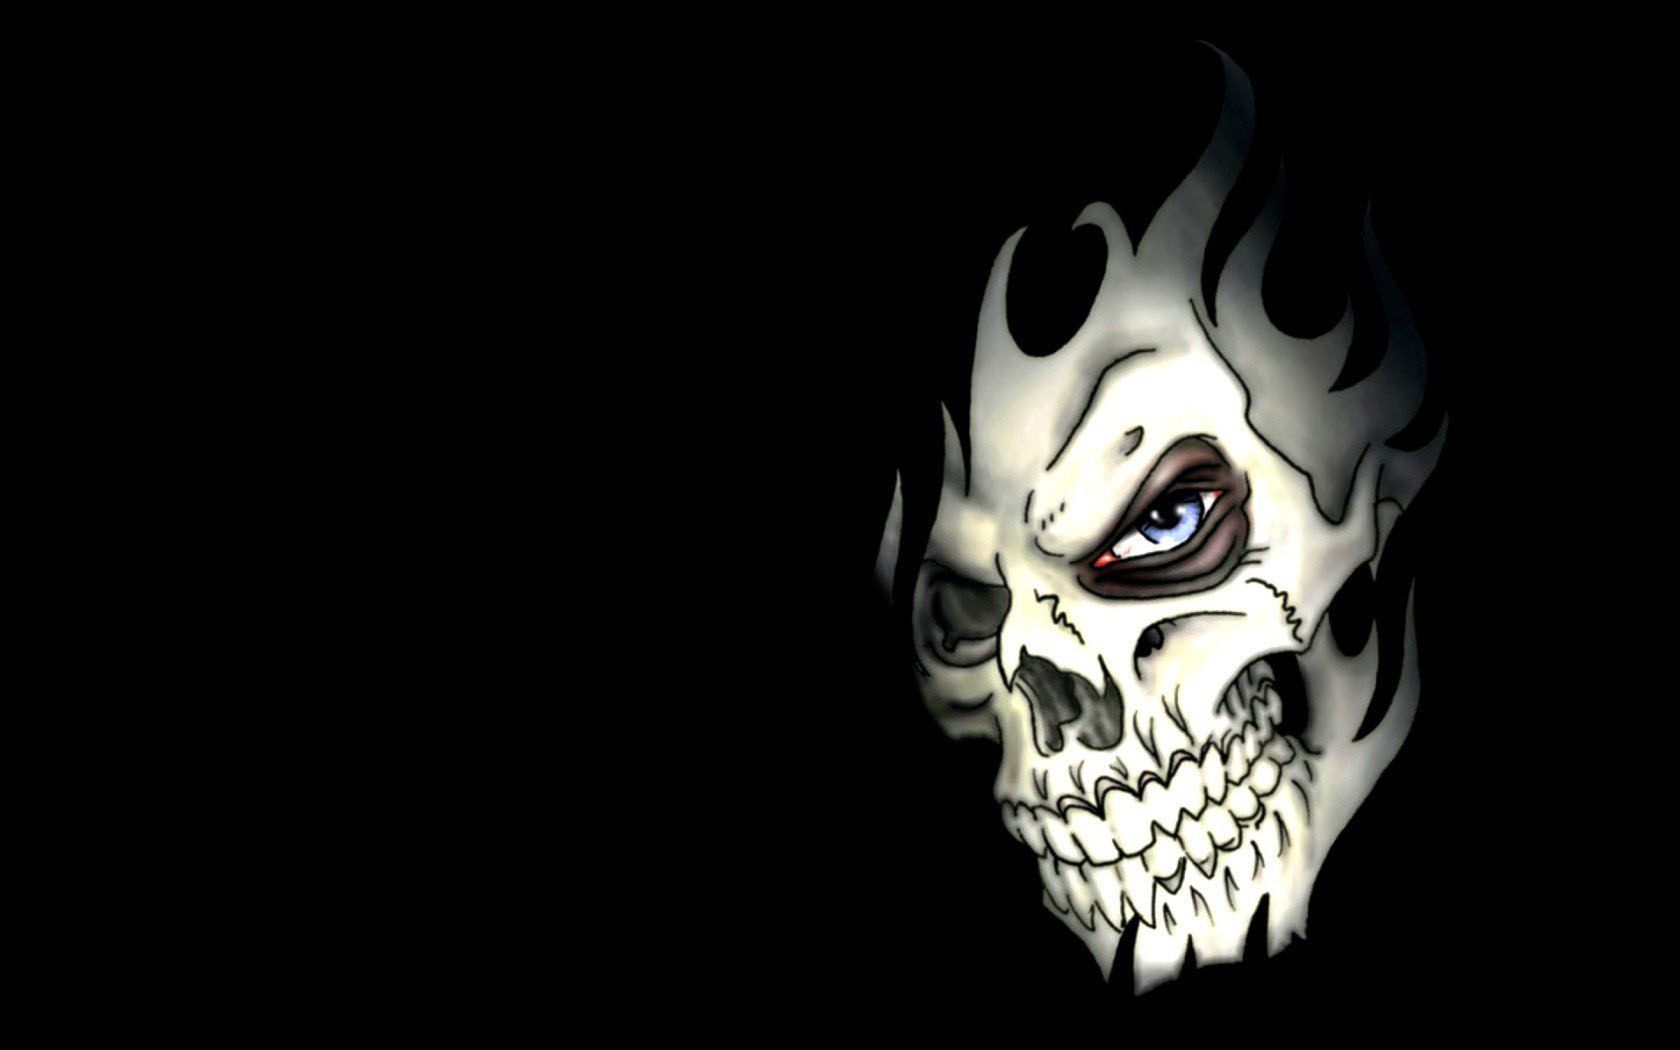 Skull Latest HD Wallpapers Free Download | New HD Wallpapers Download